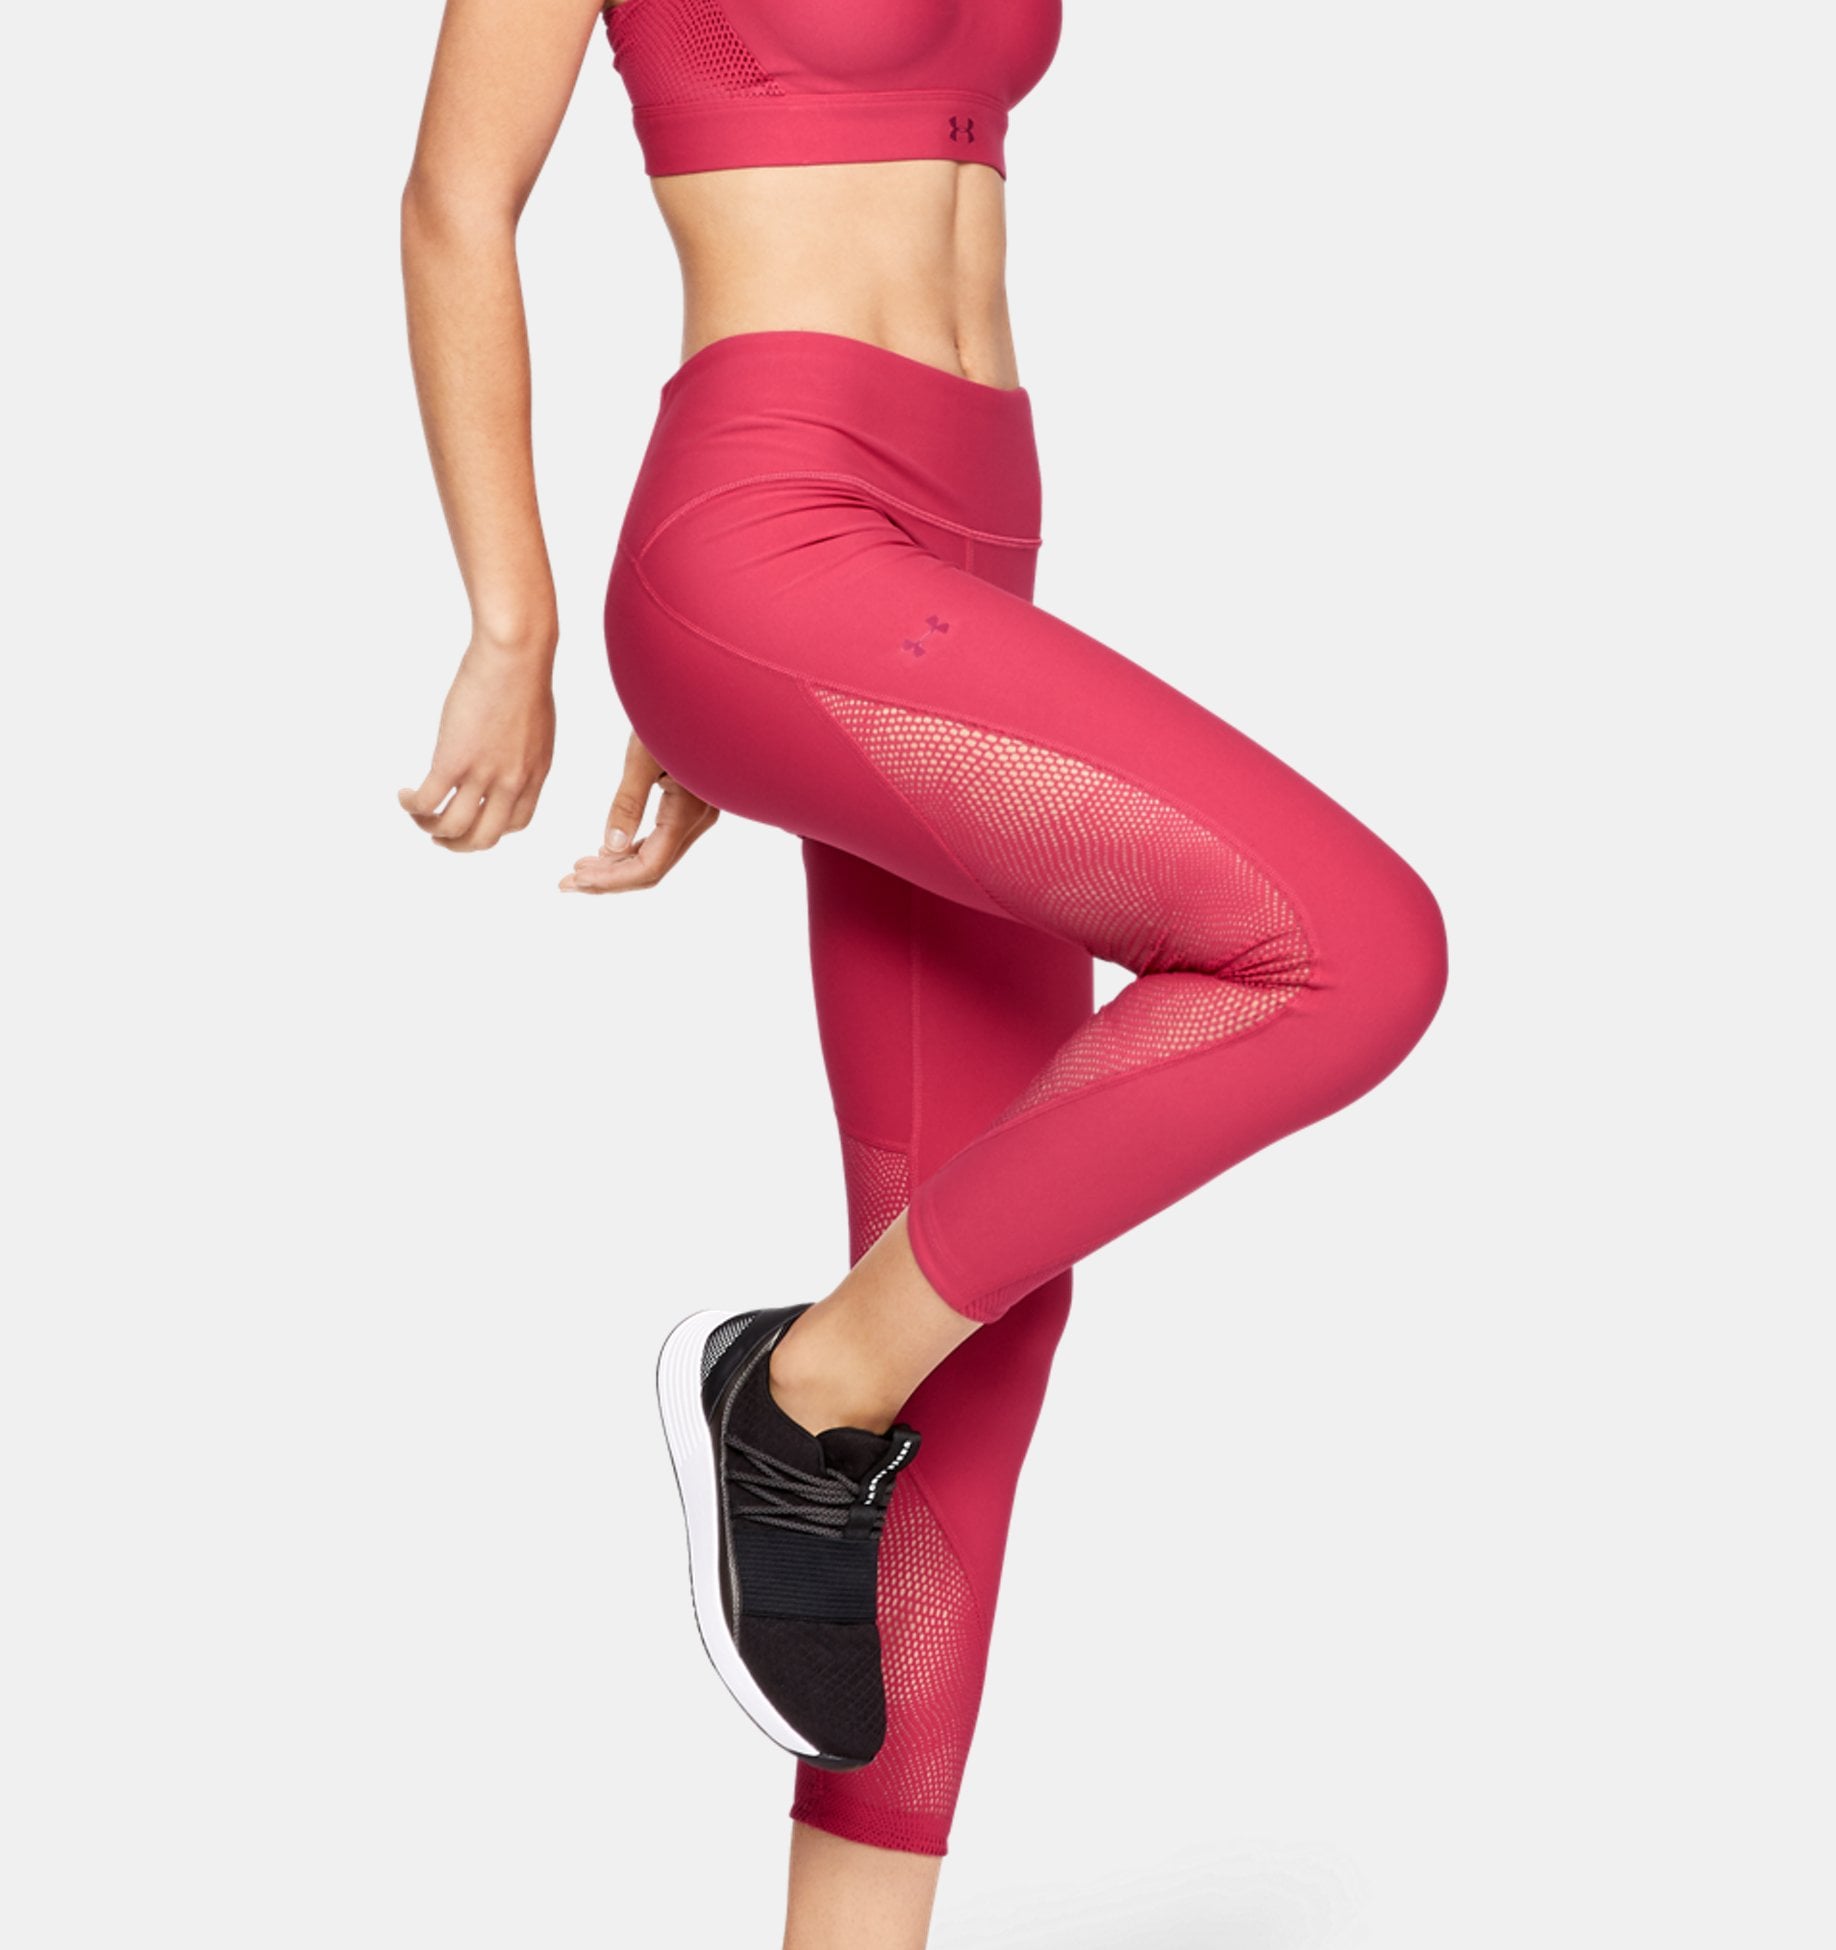 No-Slip Under Armour Bottoms Perfect For Spinning